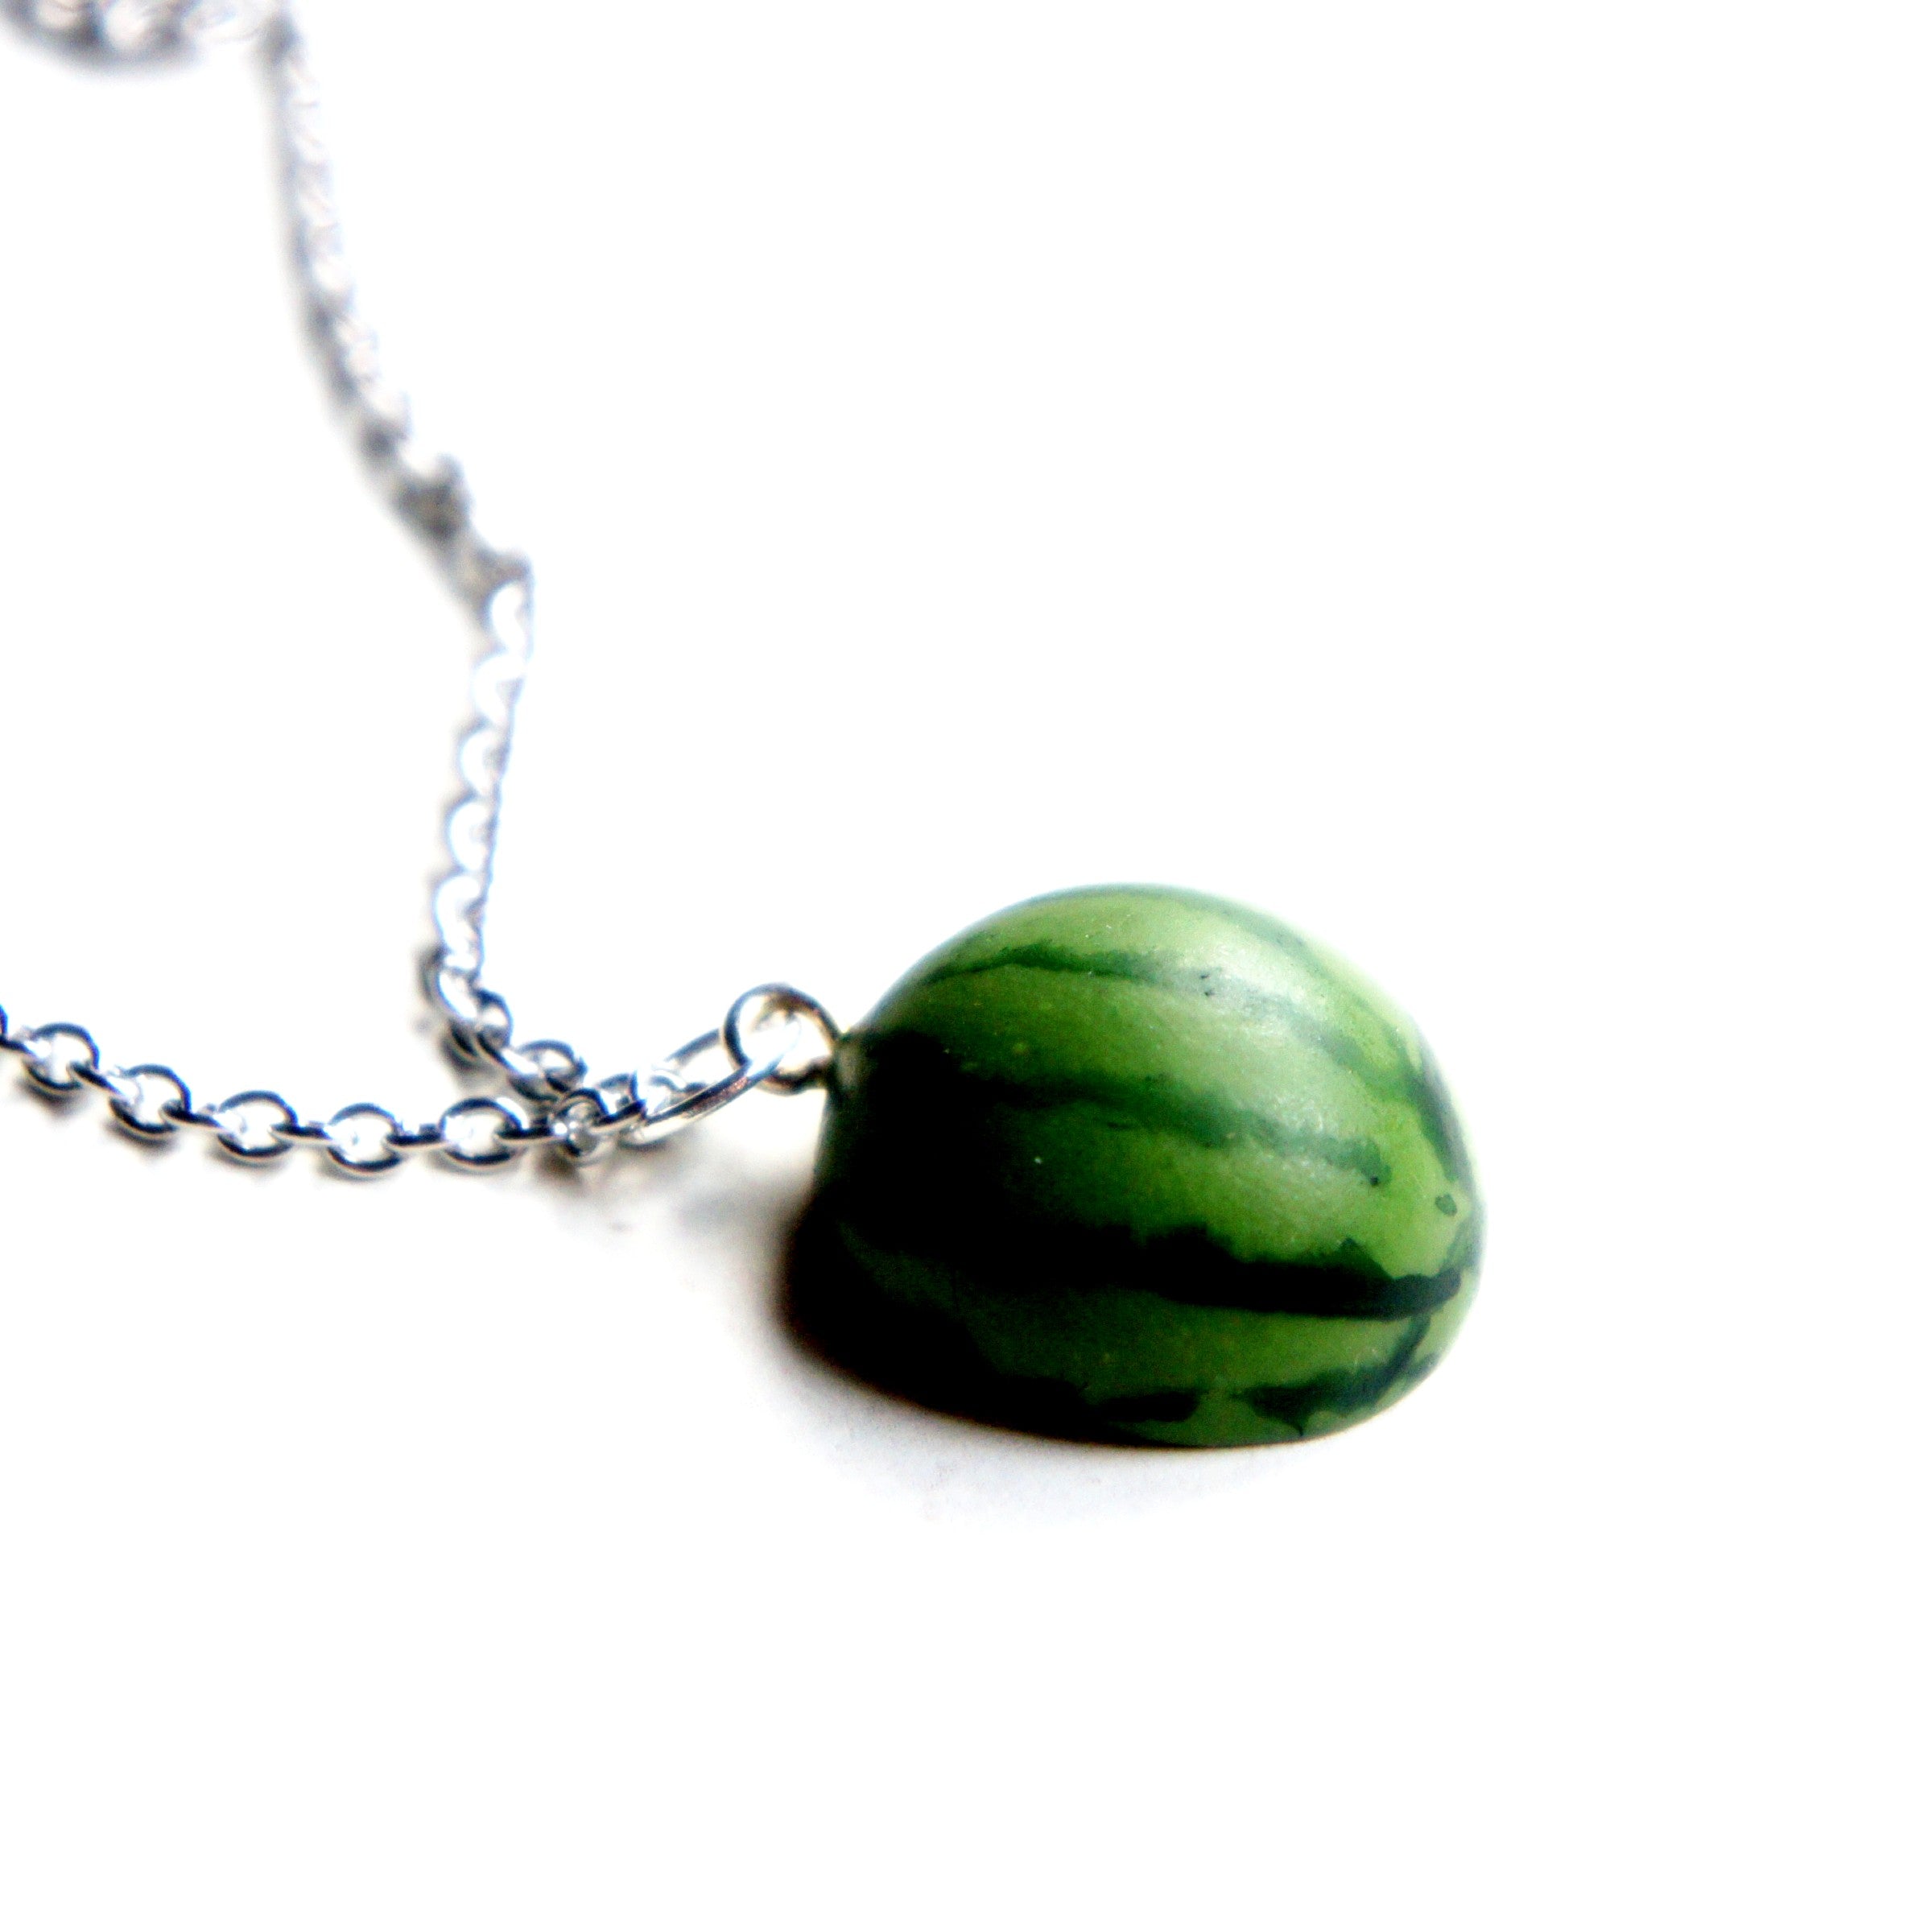 Watermelon Necklace - Jillicious charms and accessories